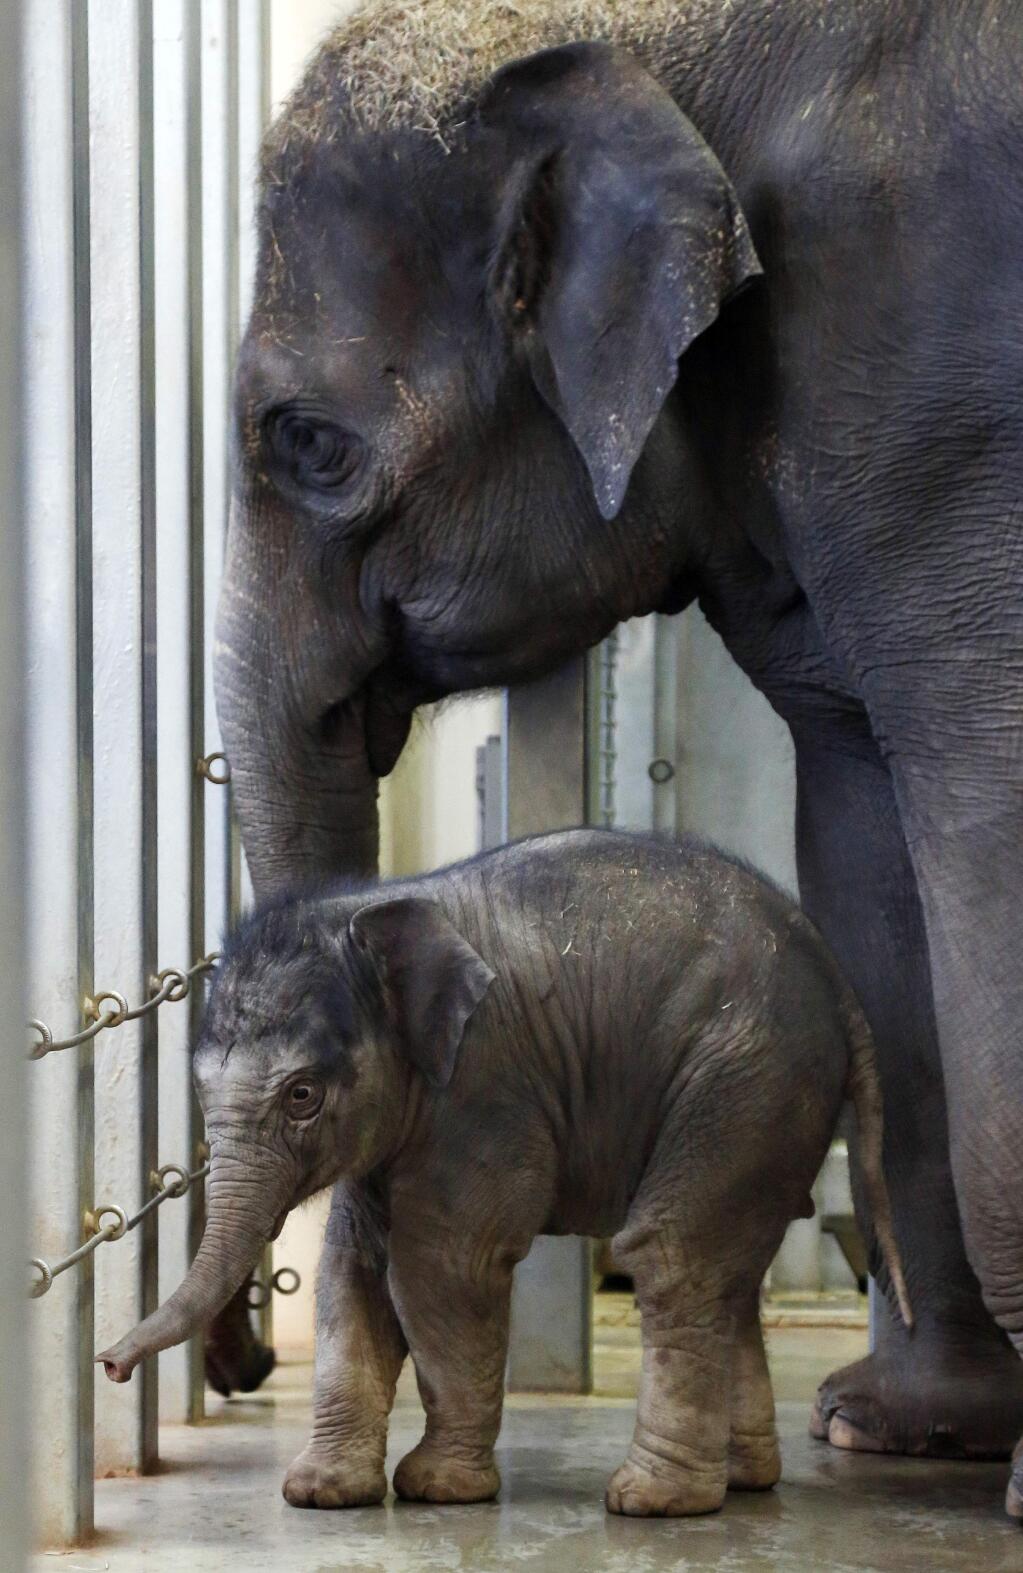 In this Tuesday, Jan. 6, 2015, file photo, a baby Asian elephant walks with her mother, Asha, at the Oklahoma City Zoo, in Oklahoma City. The baby elephant, born at the zoo Dec. 22, 2014, has been named Achara, after the name received about 13,000 votes on the zoo's website. (AP Photo/Sue Ogrocki, File)